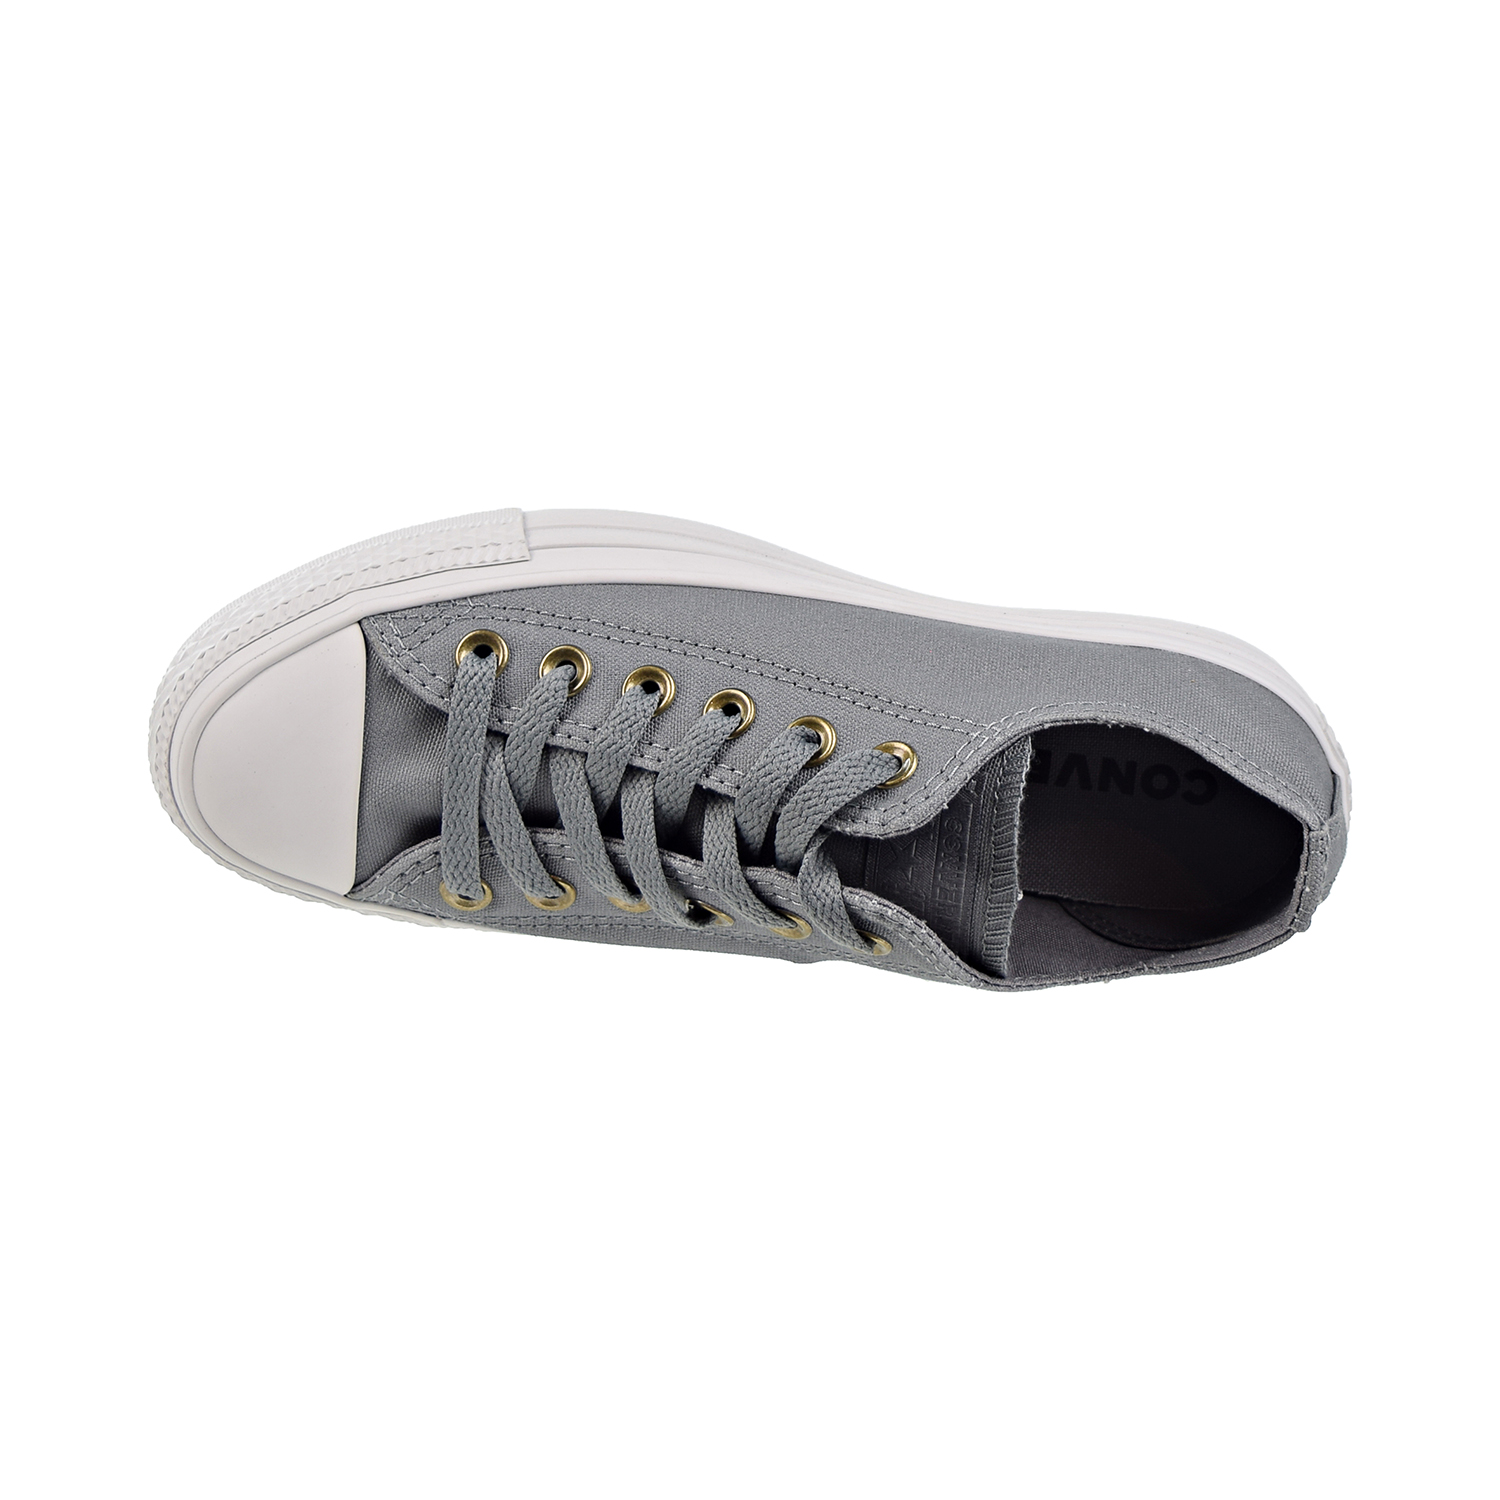 Converse Chuck Taylor All Star OX Mens Shoes Mason-Mouse  161487f - image 5 of 6